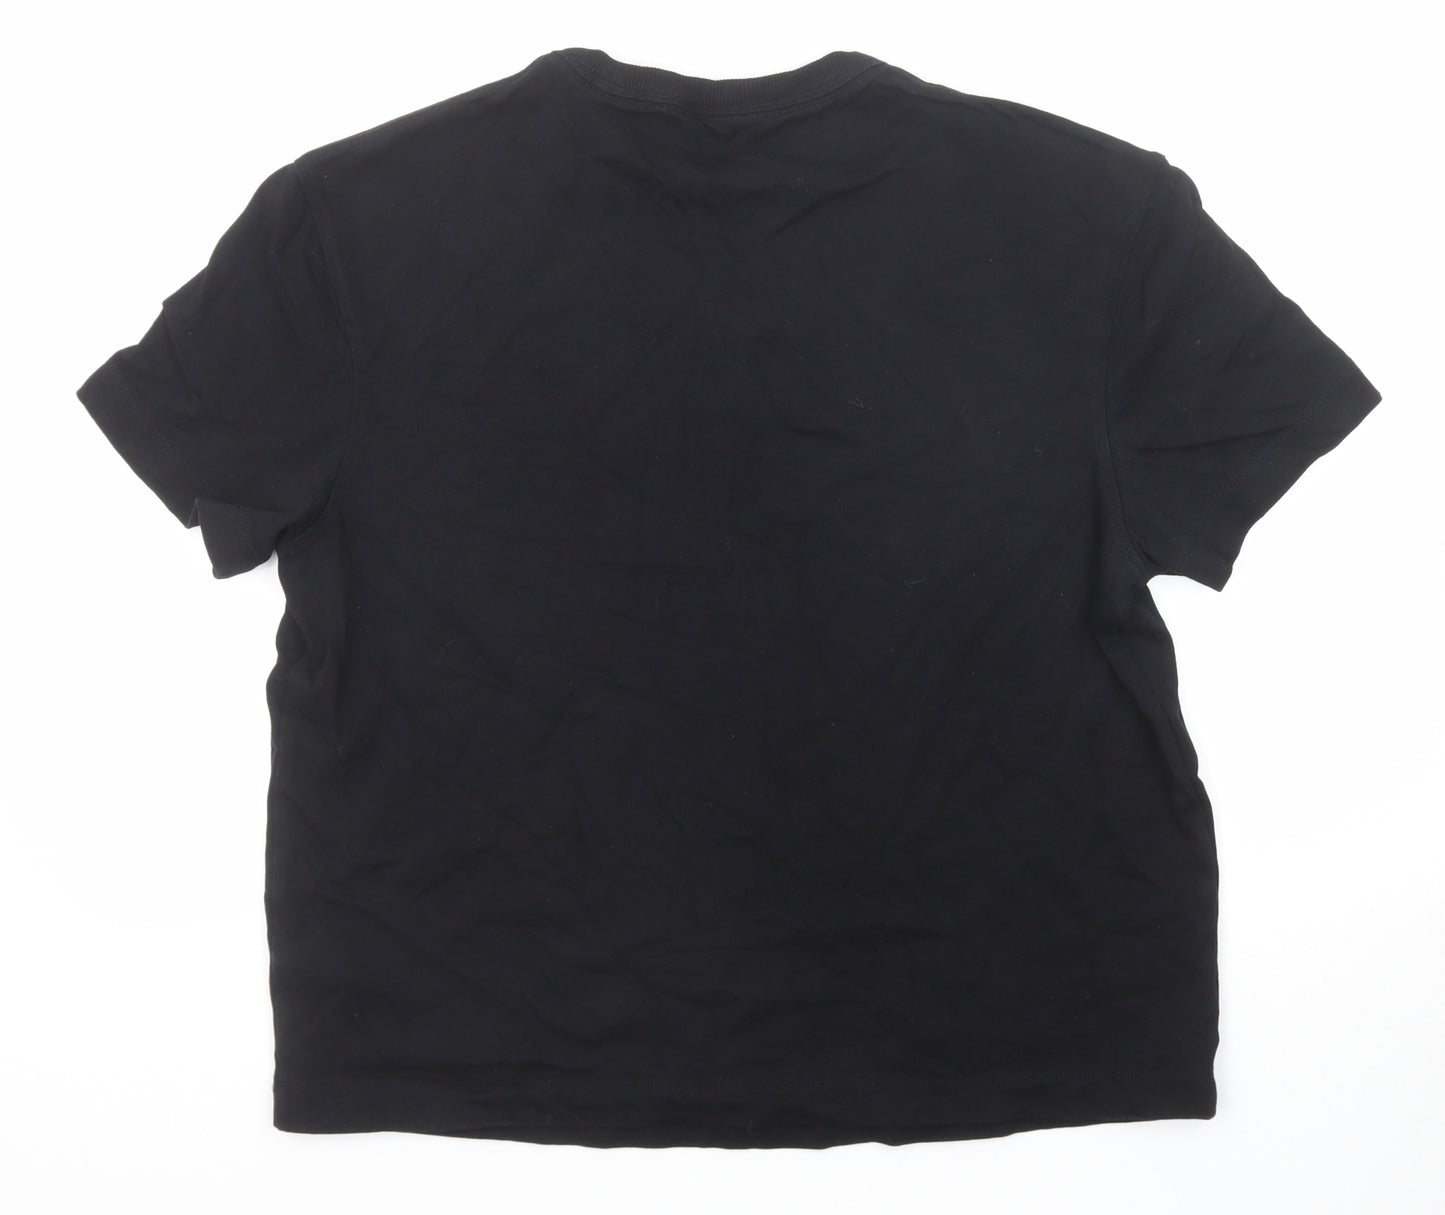 Marks and Spencer Womens Black Cotton Basic T-Shirt Size L Crew Neck